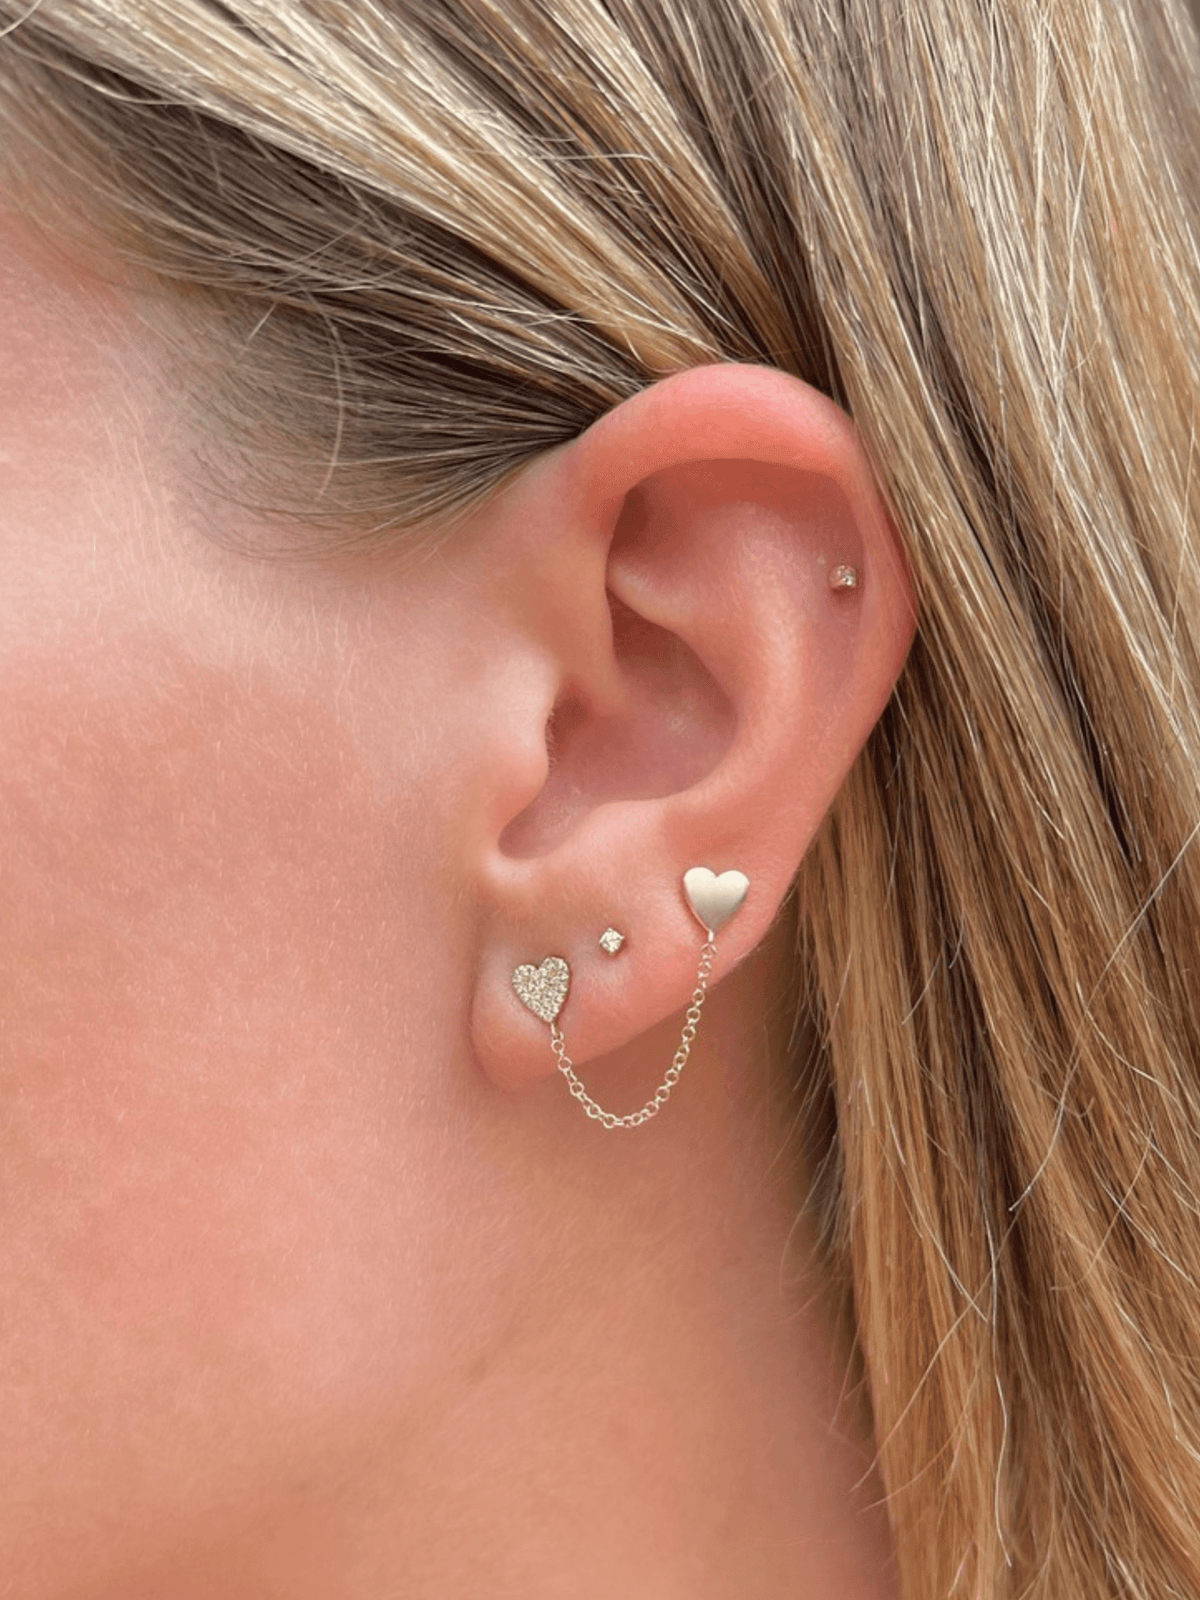 Yellow gold heart stud earring attached to pave heart stud earring linked by chain on model ear with two tiny diamond stud earrings also on ear